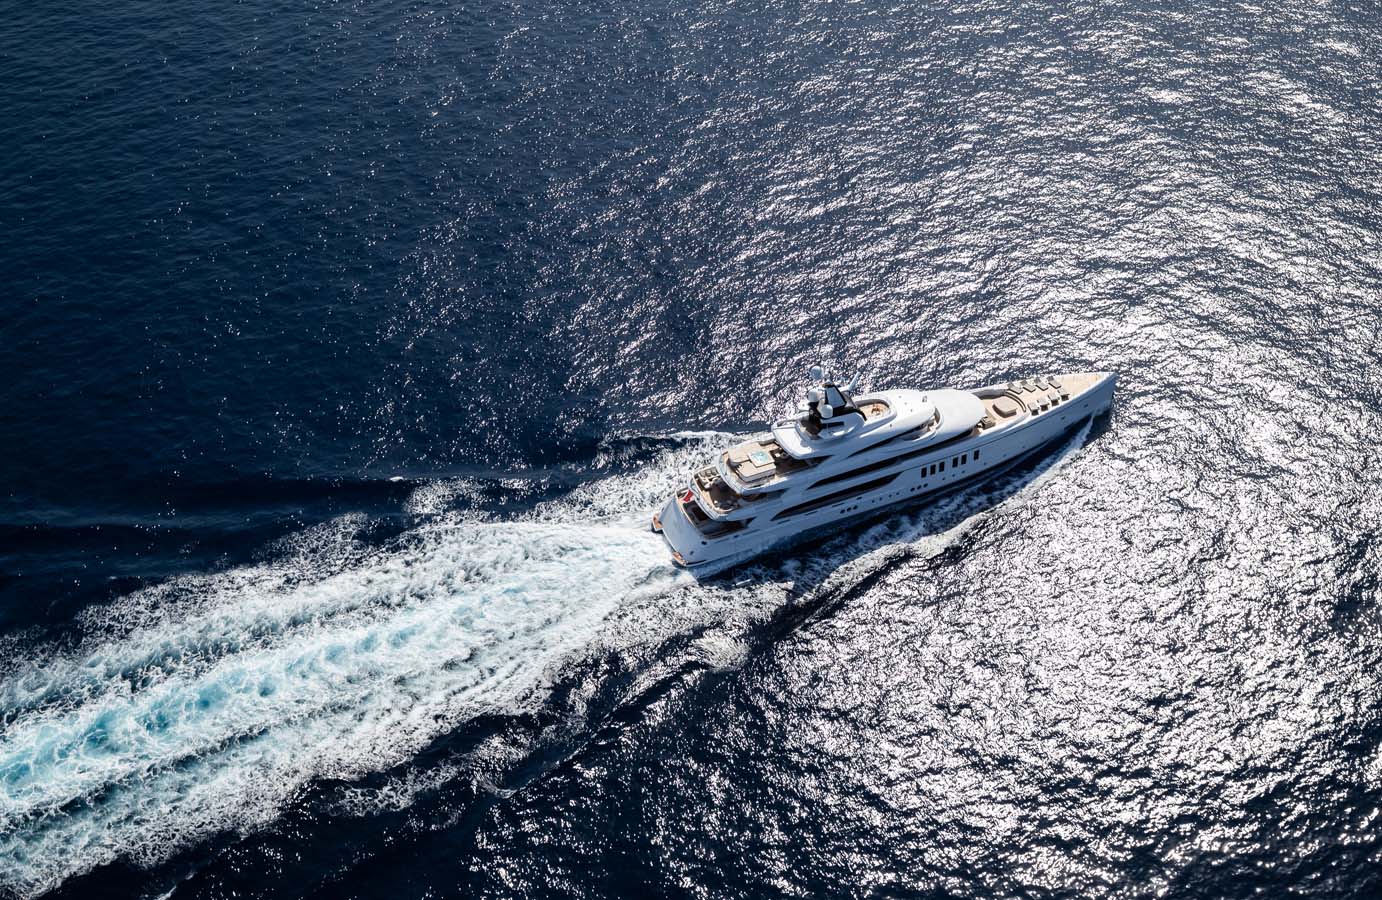 running aerial view of the yacht ARTISAn - Photo © Jeff Brown